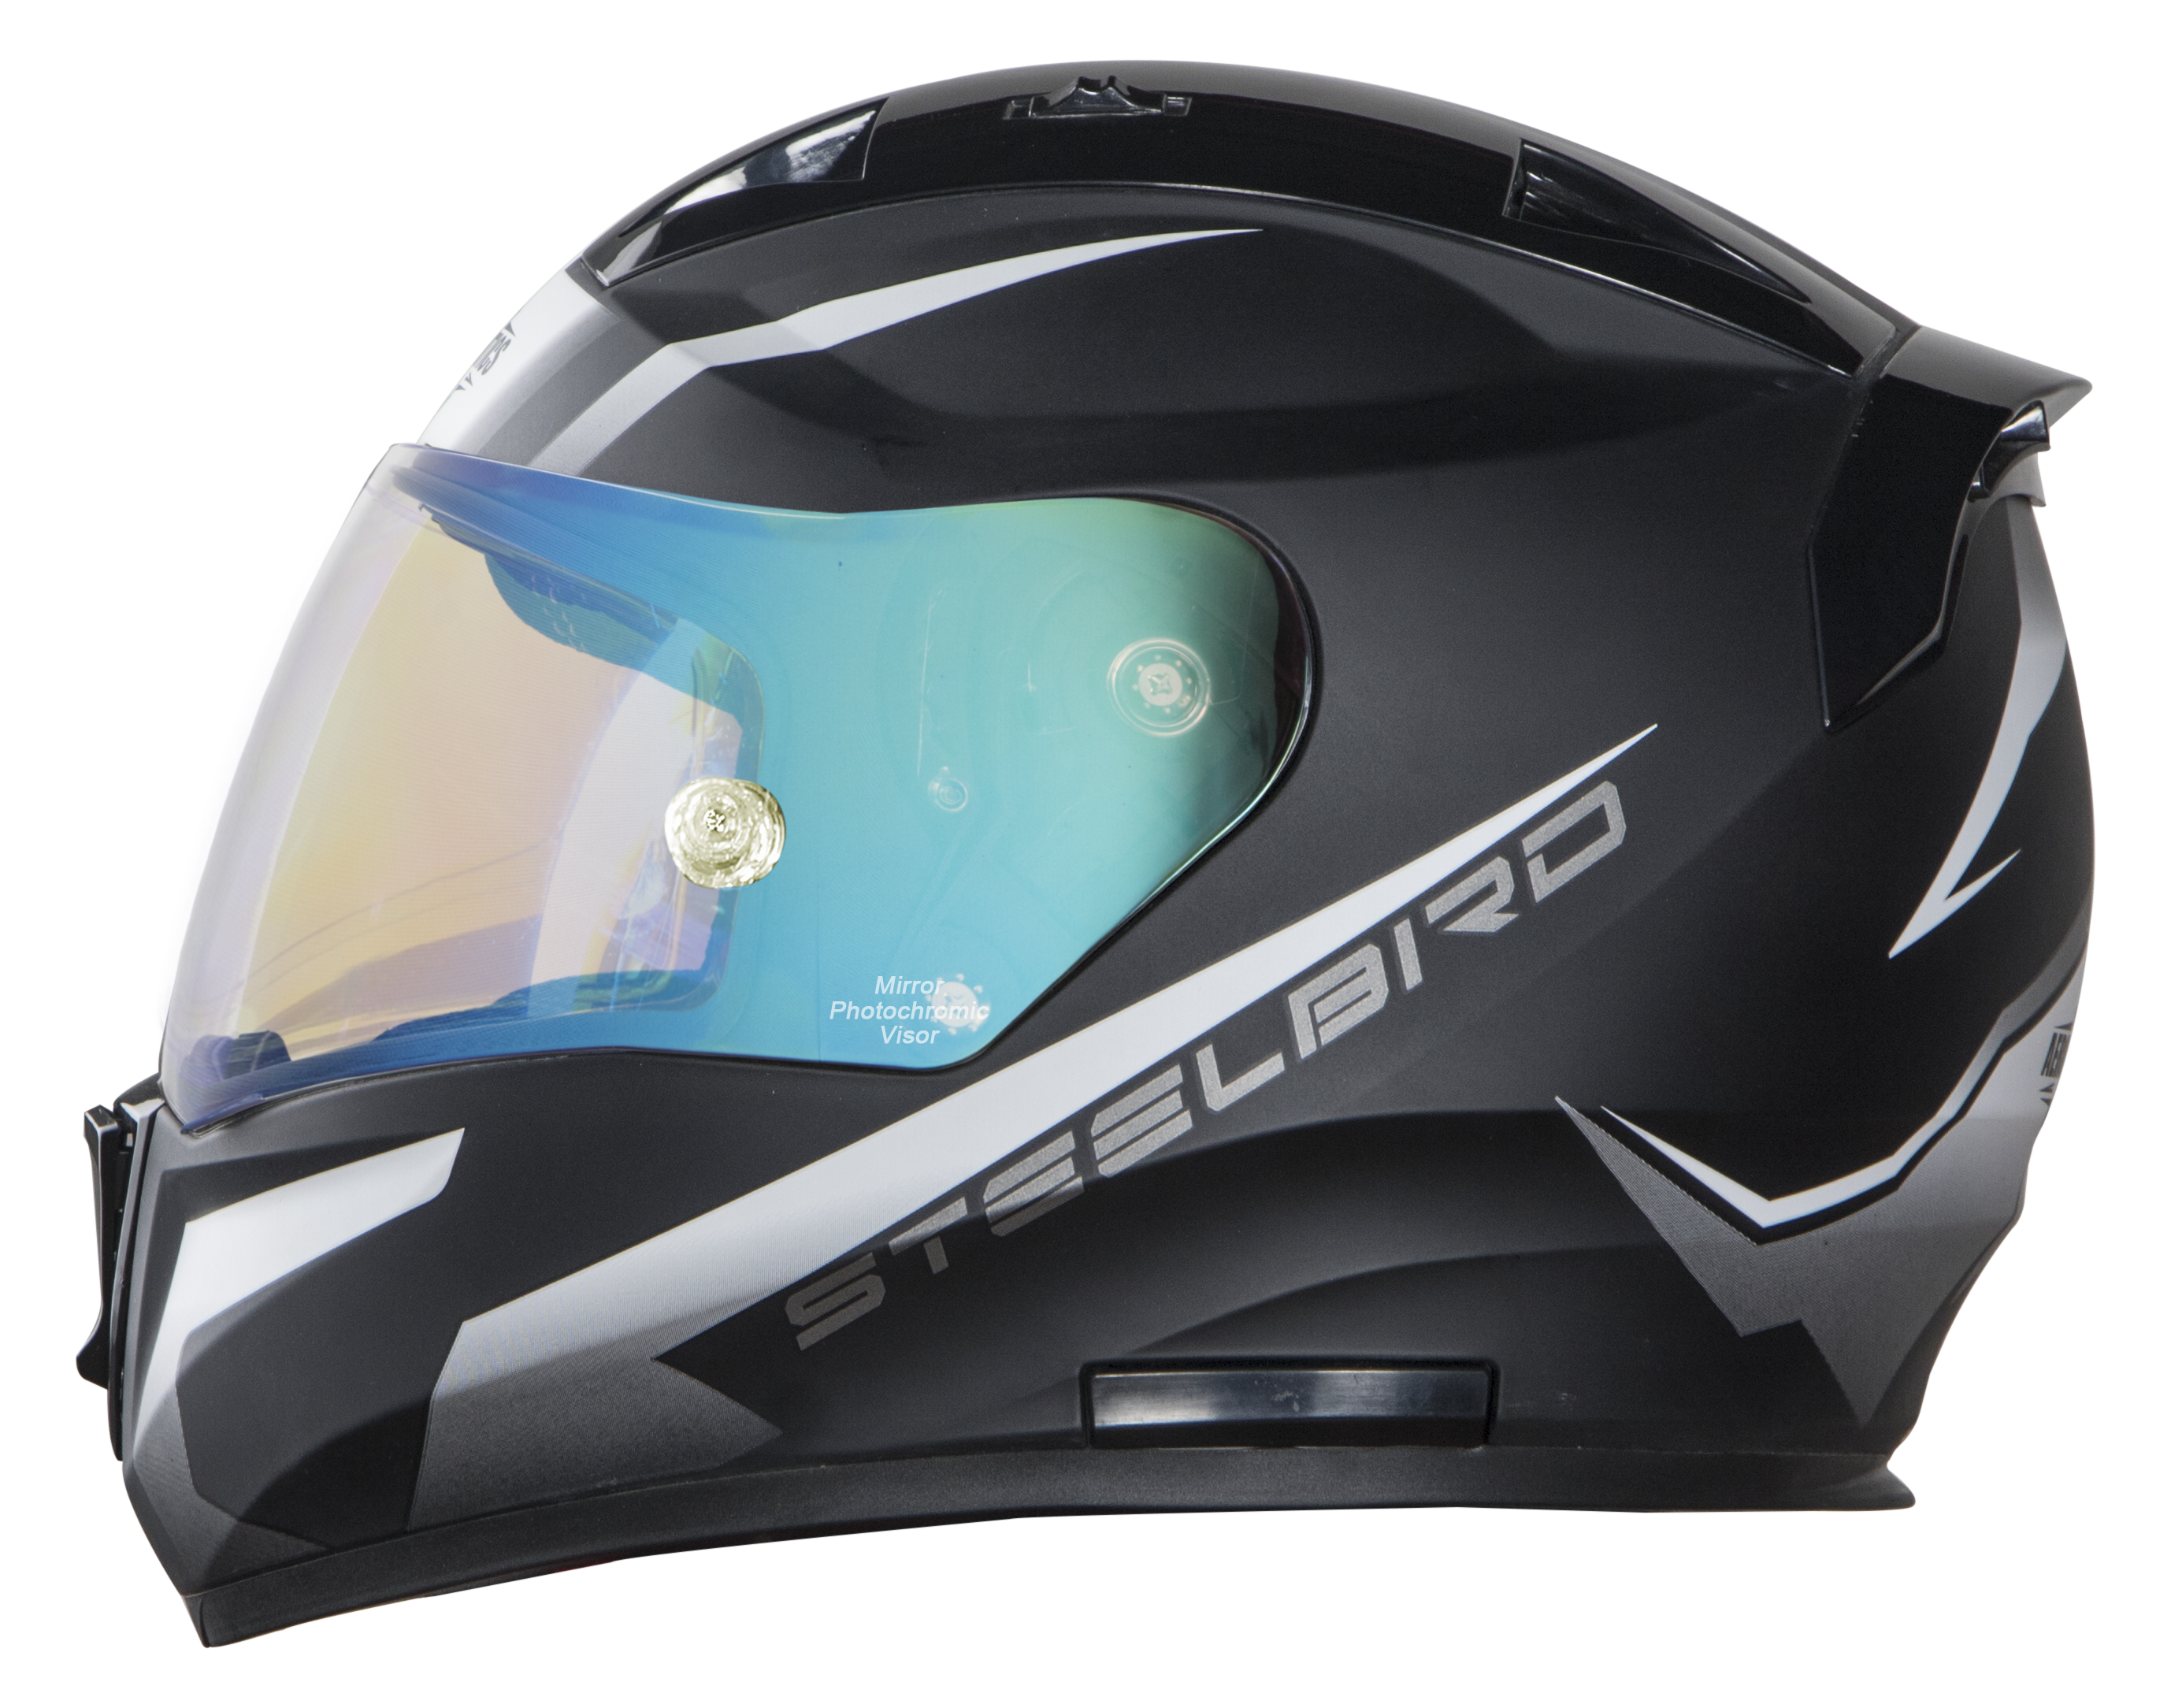 SA-1 WHIF Mat Black/White (Fitted With Clear Visor Extra Anti-Fog Shield Blue Night Vision Photochromic Visor Free)